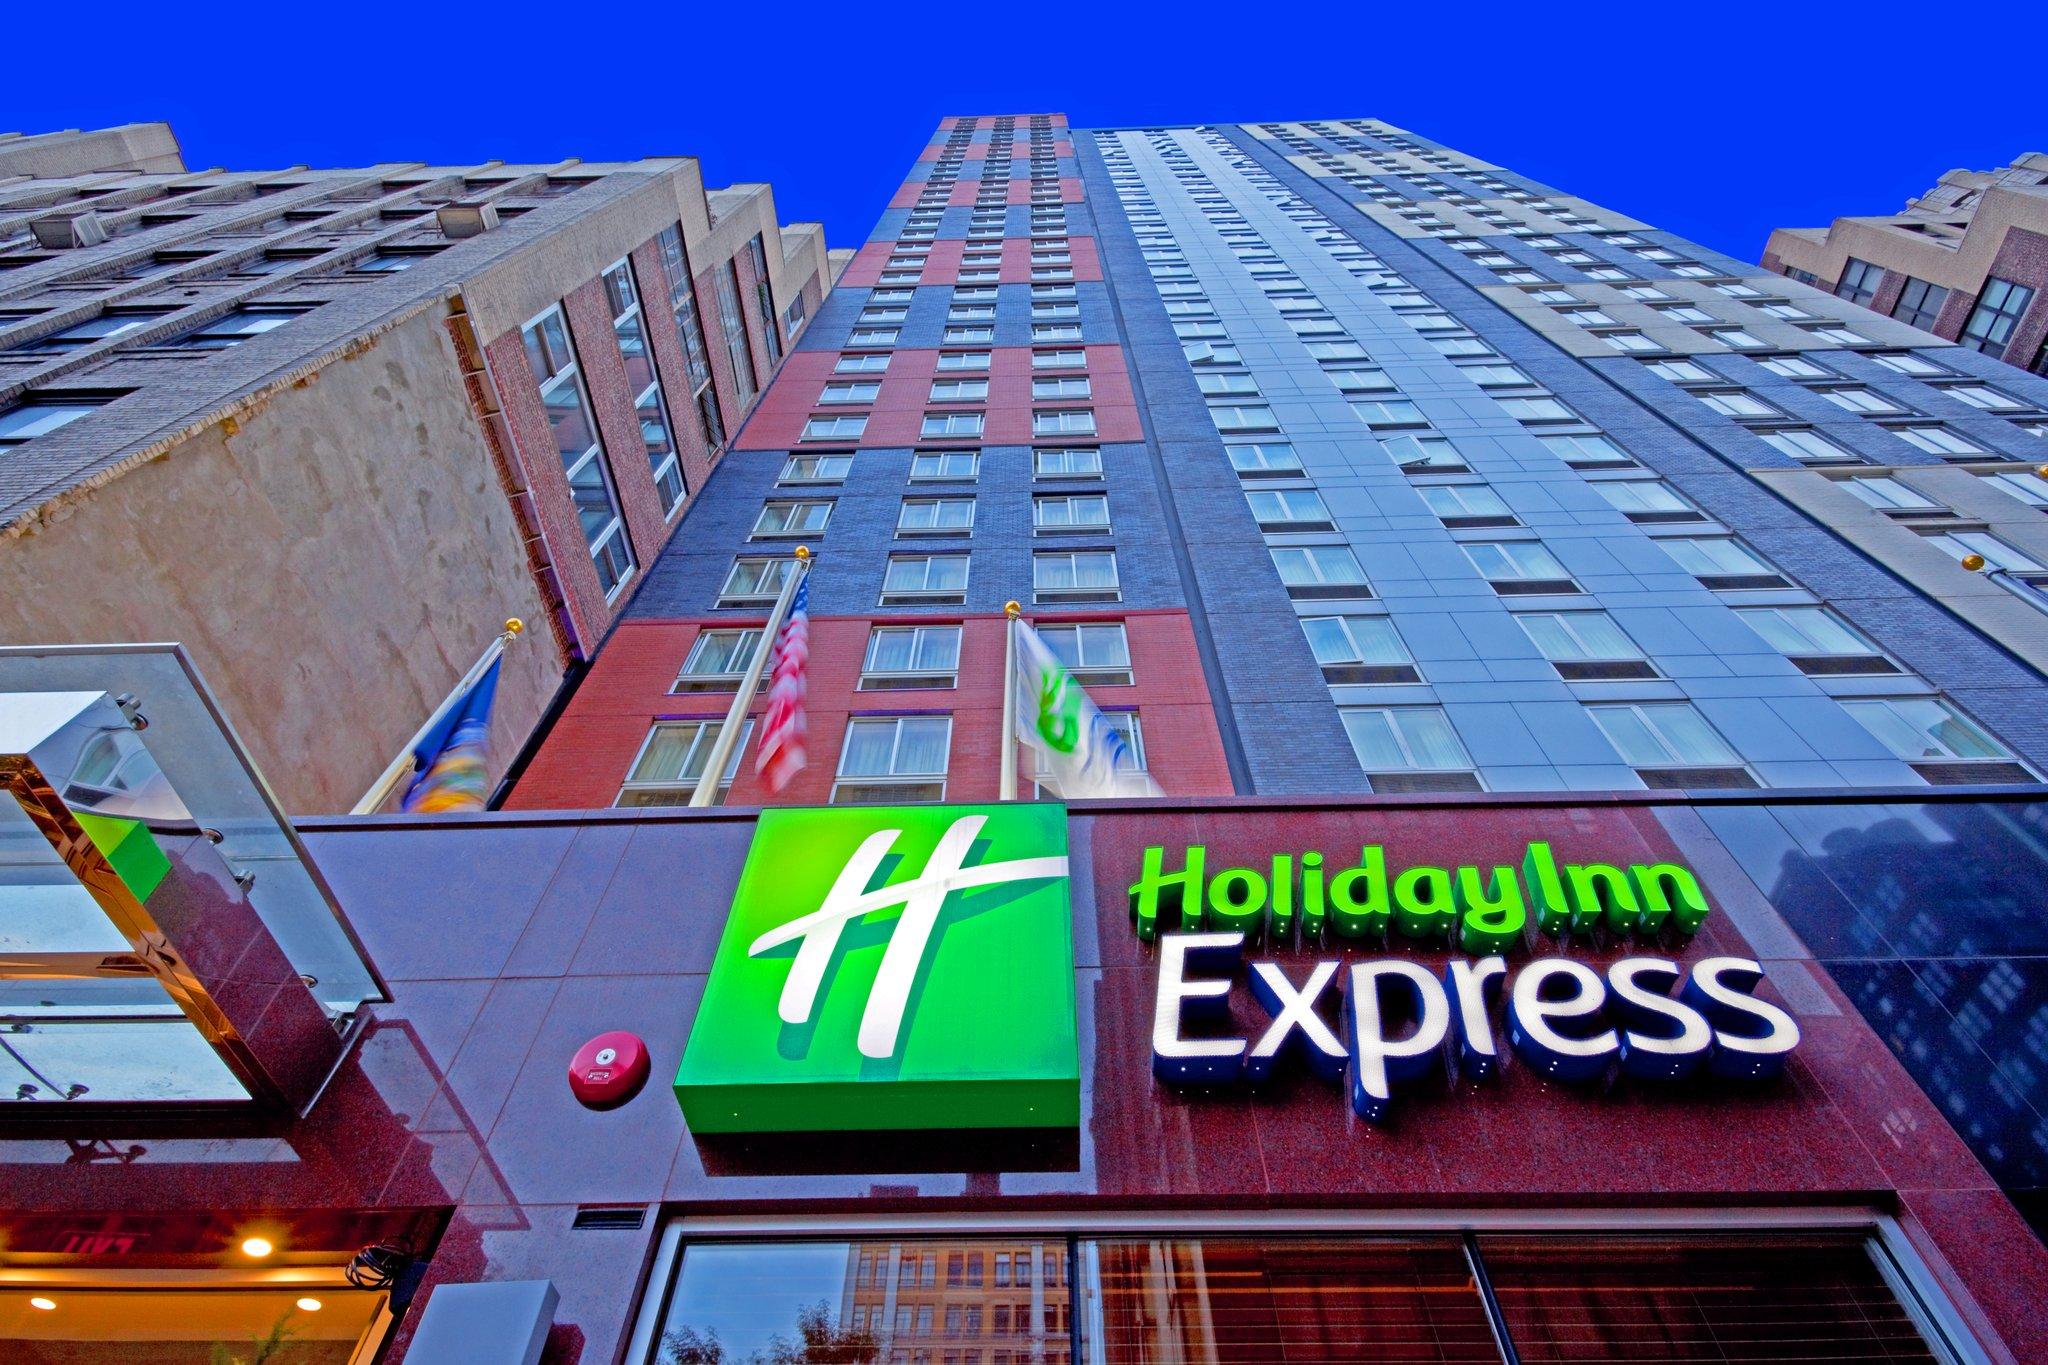 Holiday Inn Express New York City Times Square in New York, NY